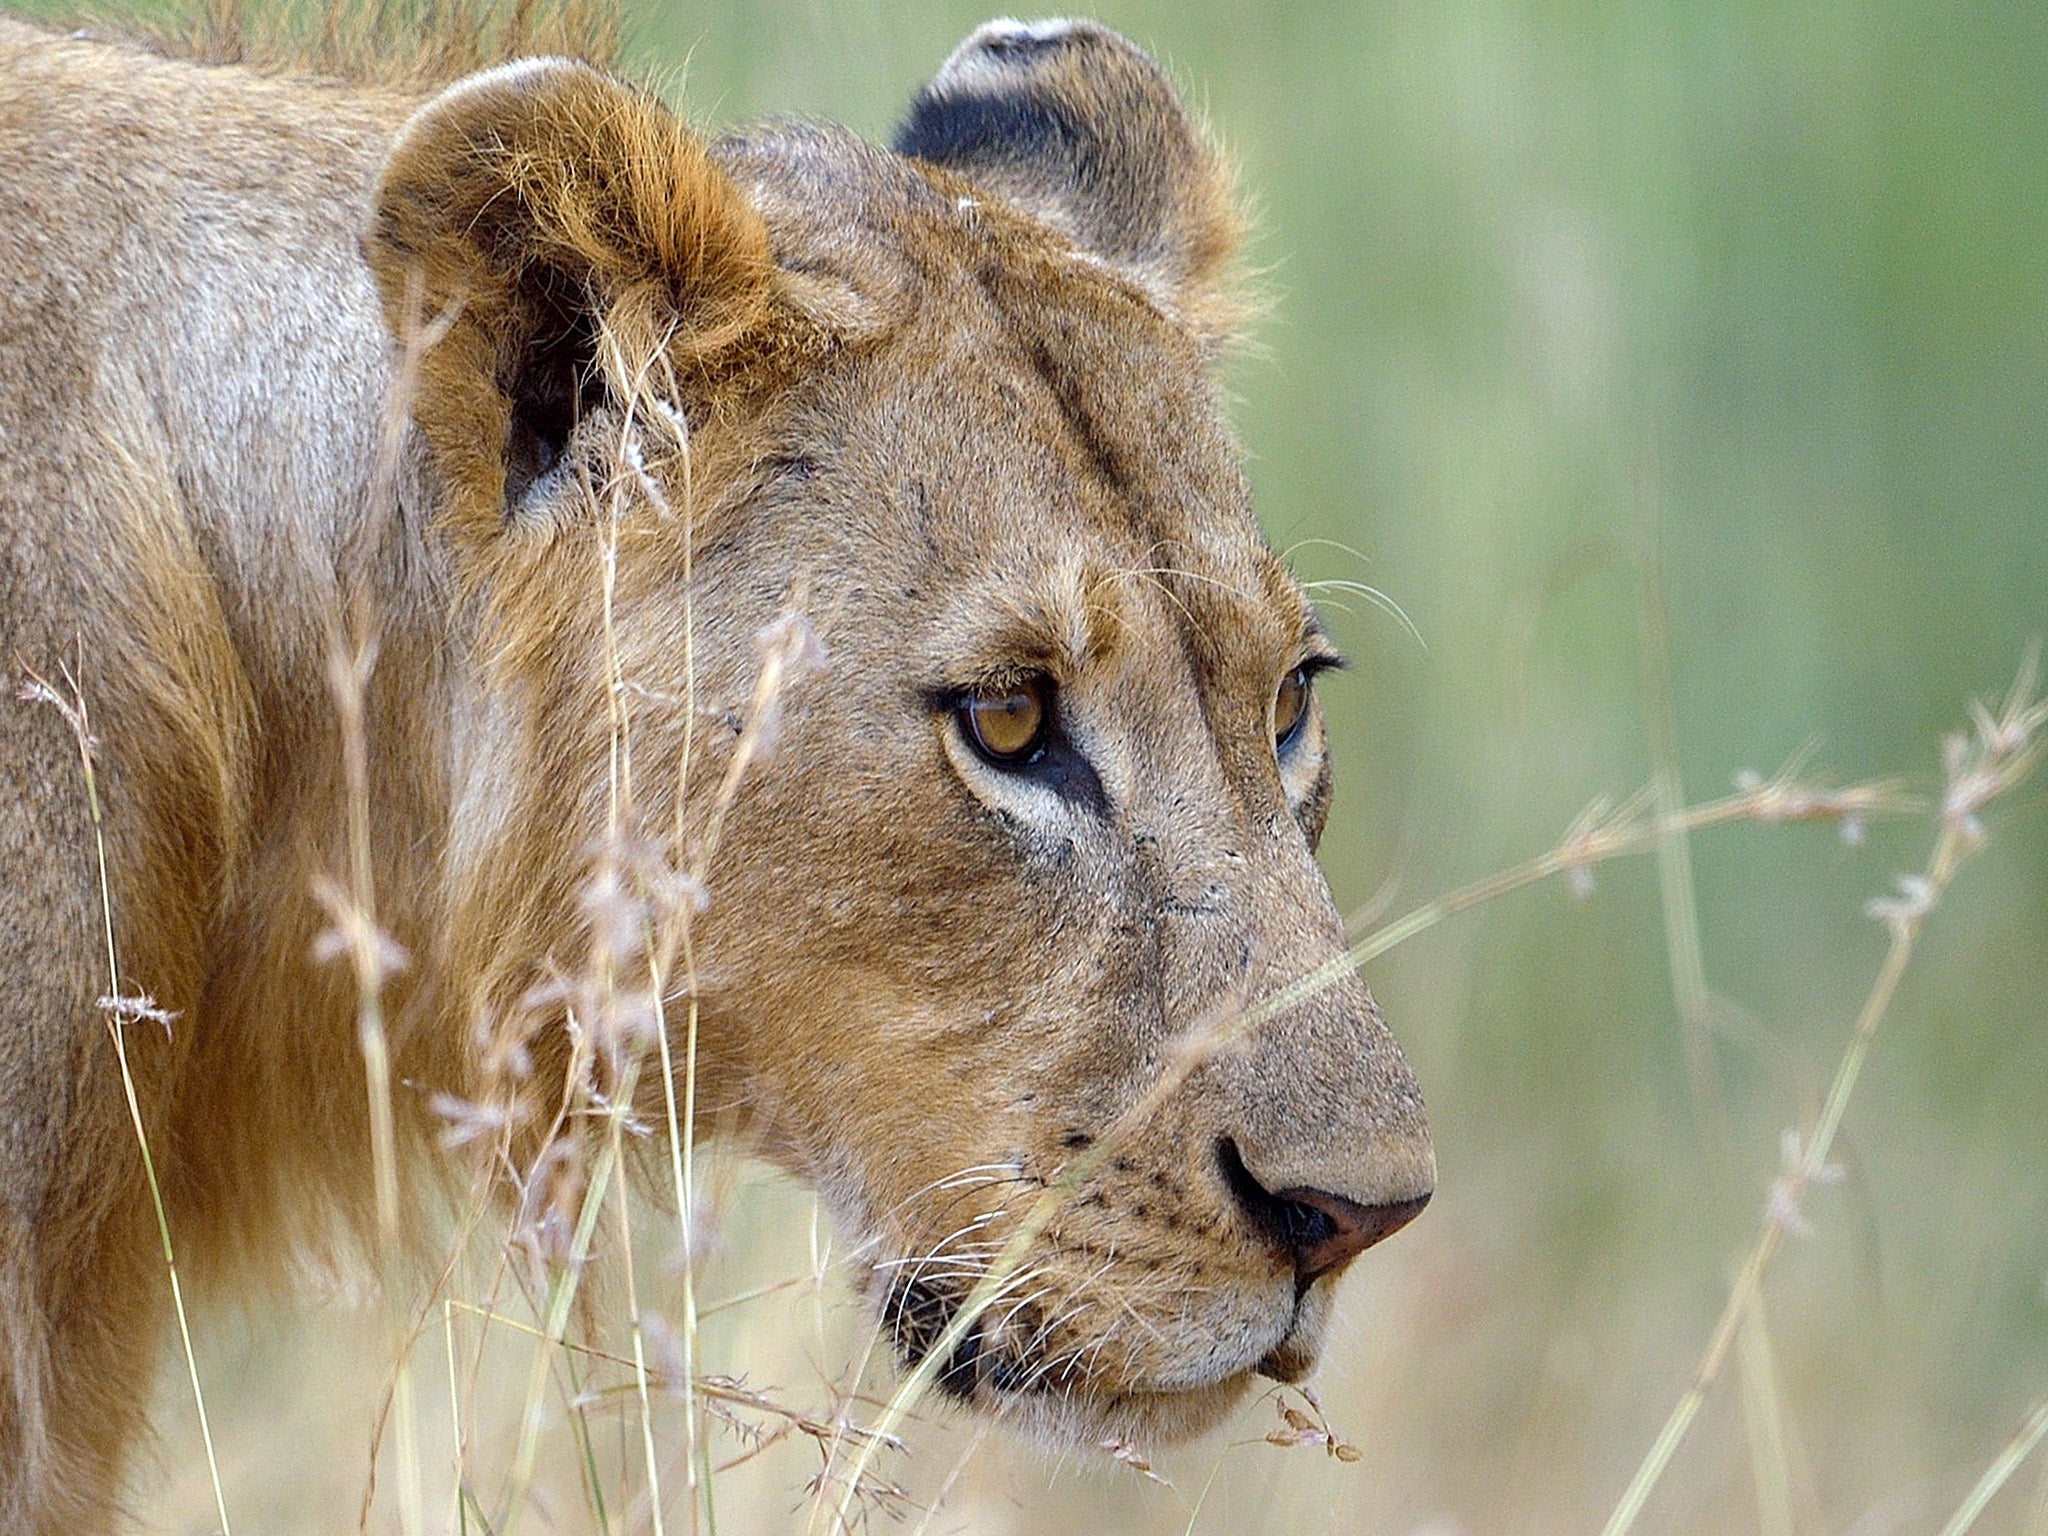 A lion pictured at Nairobi National Park in Kenya last year